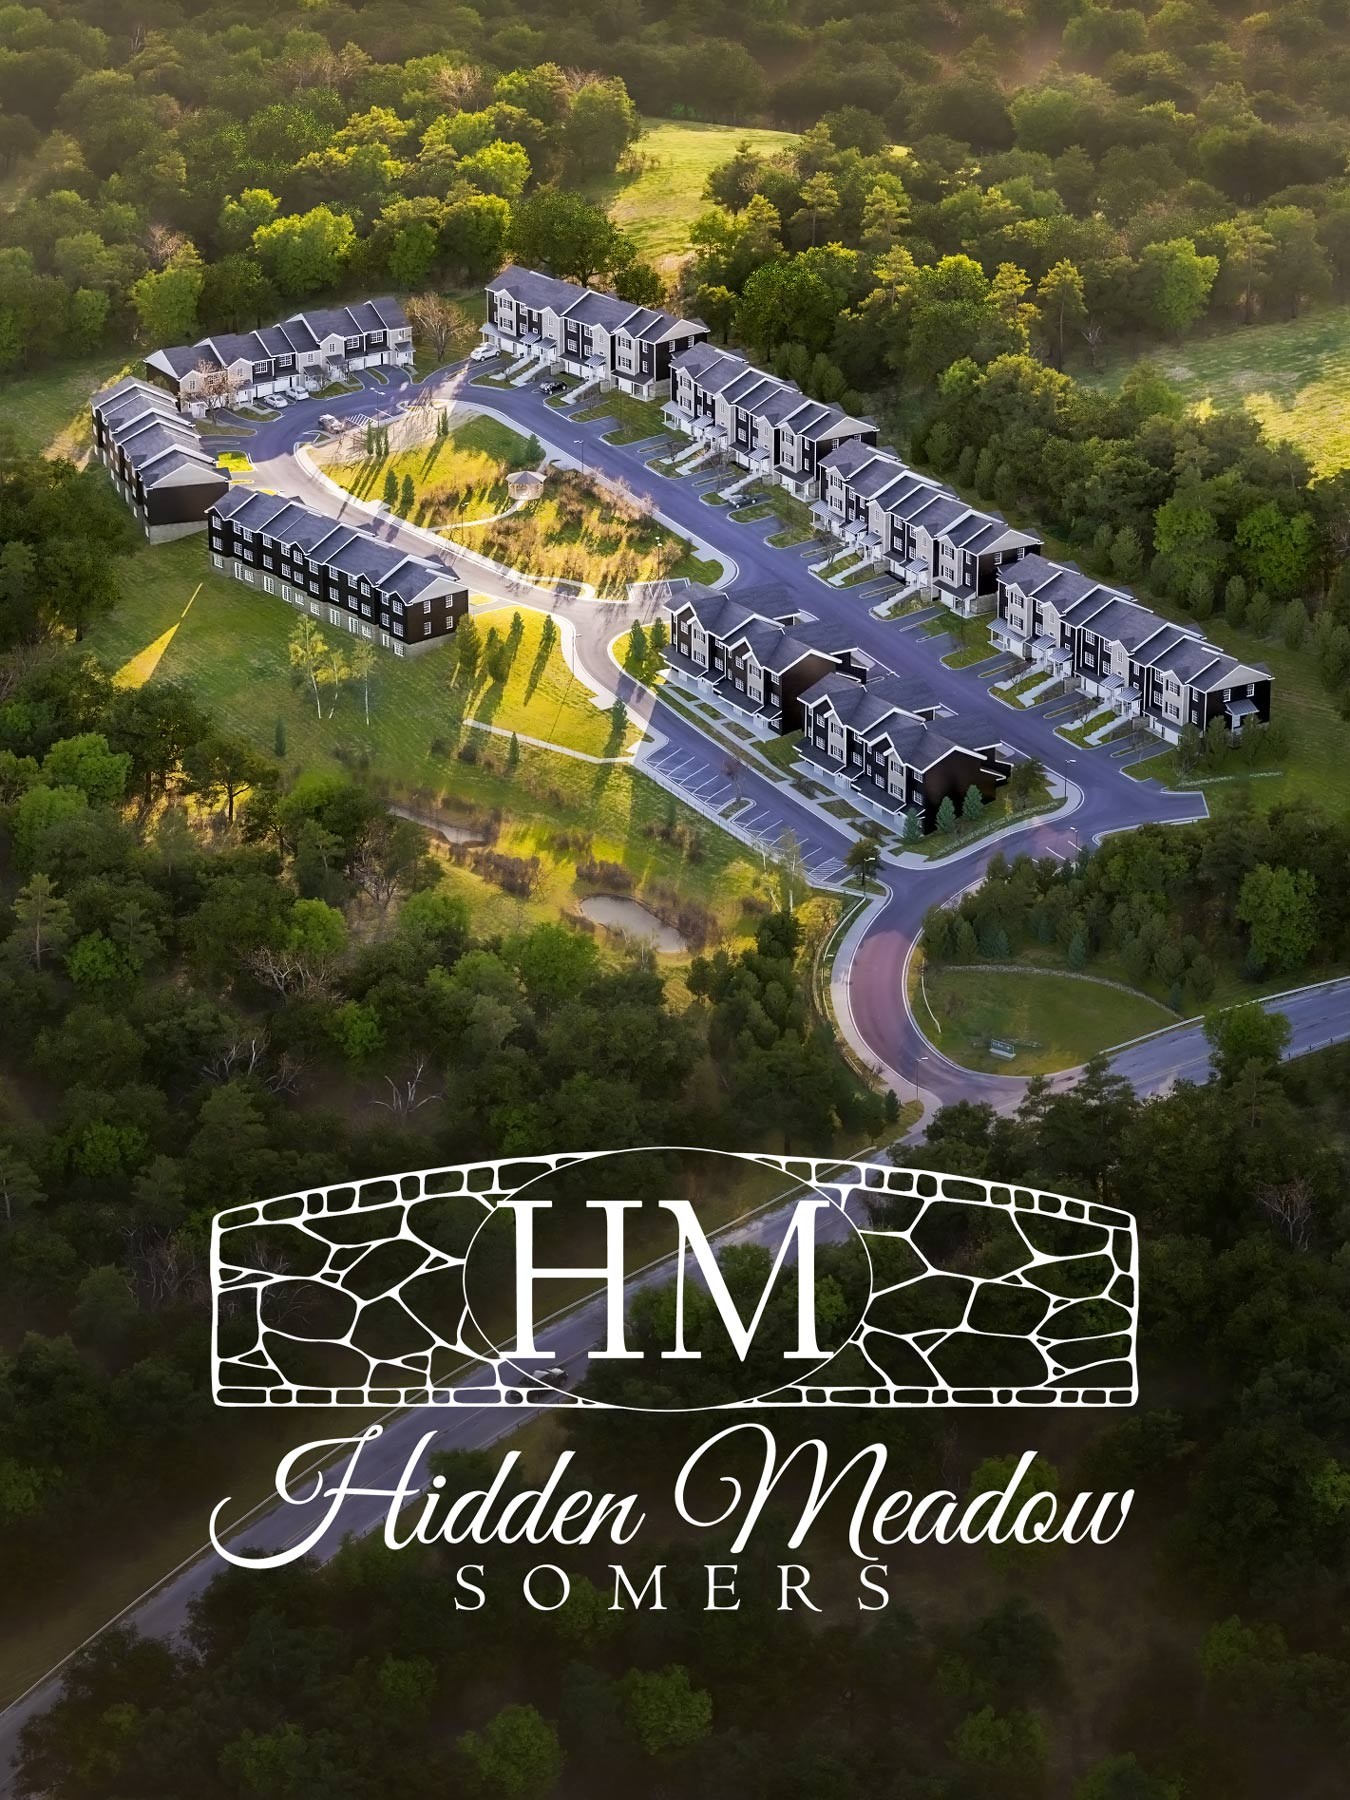 The Growing Appeal of Townhouse Living in the Hudson Valley – Presented by Hidden Meadow Townhomes Community in Somers, NY